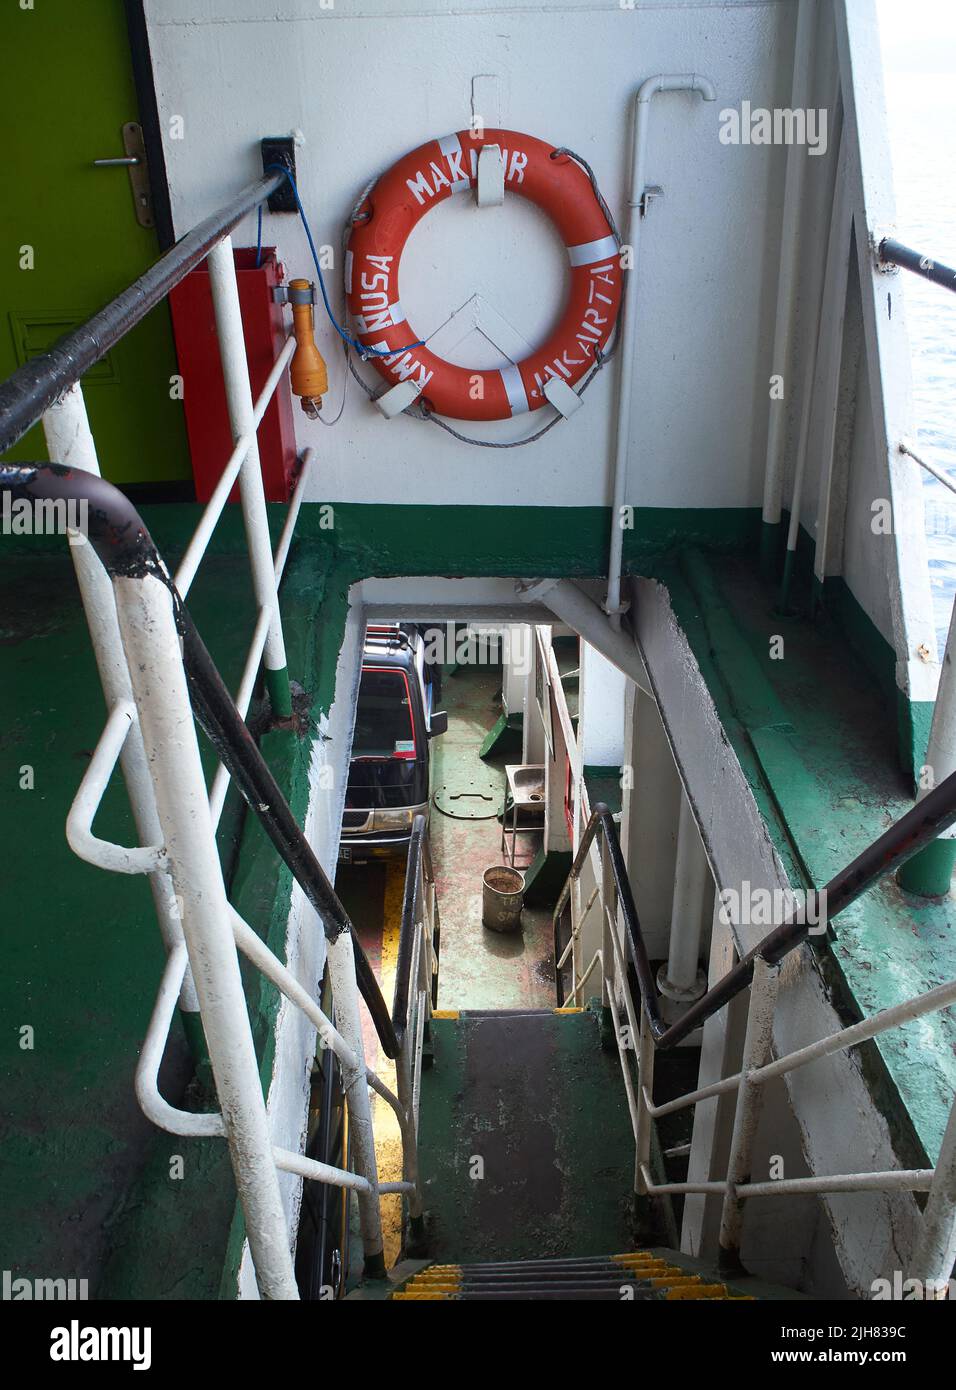 lifebuoy hanging on a ladder in a ferry Stock Photo